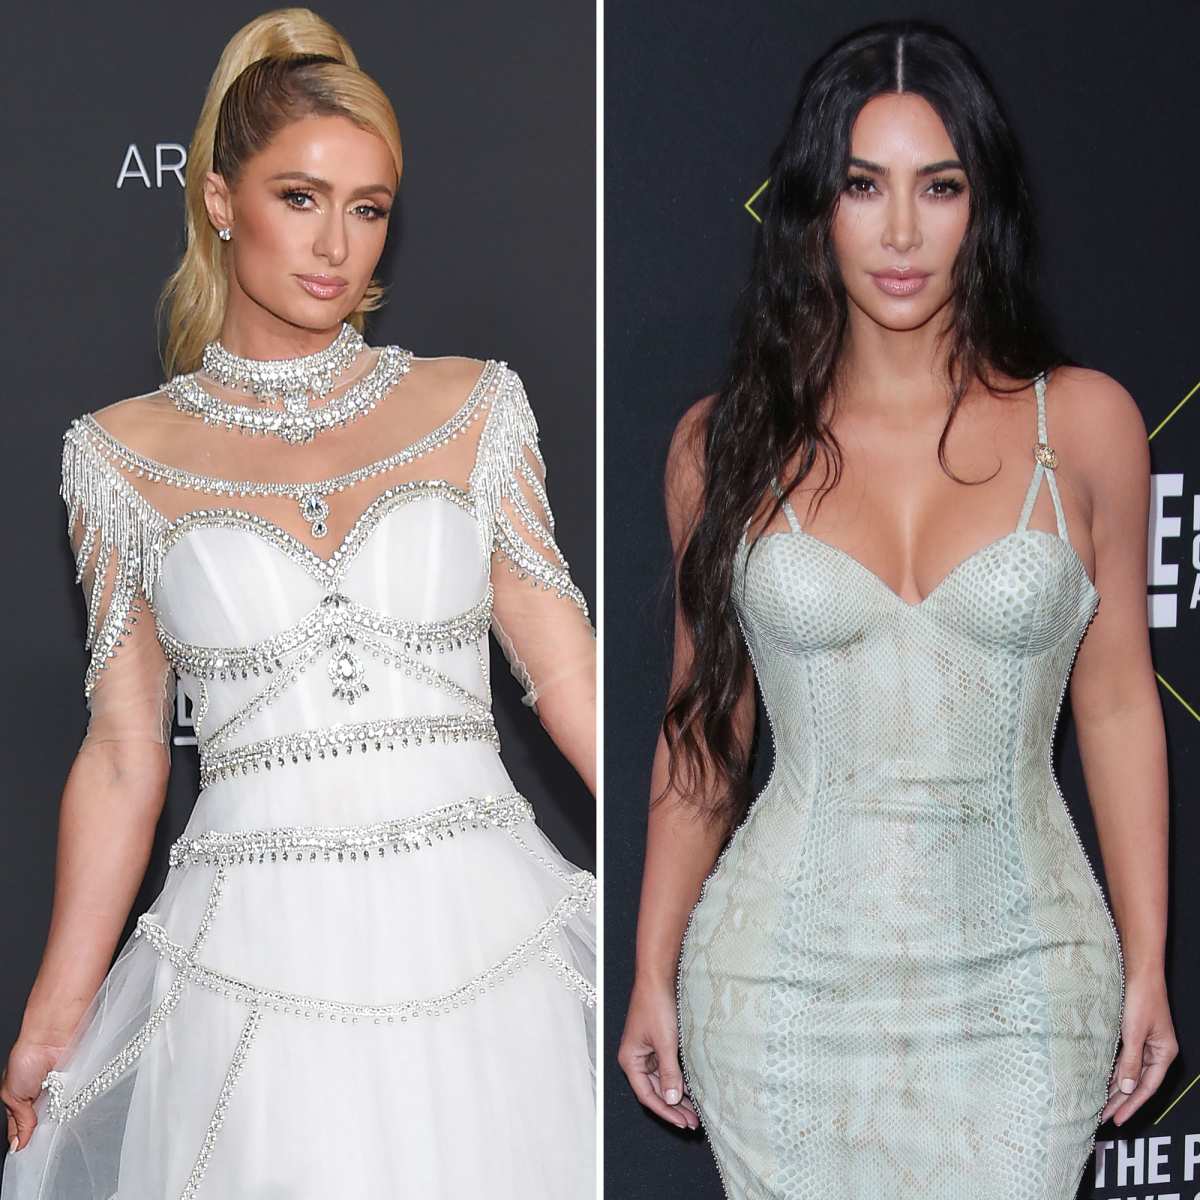 13 Photos of Kim and Paris That Will Change the Way You See Kim Forever